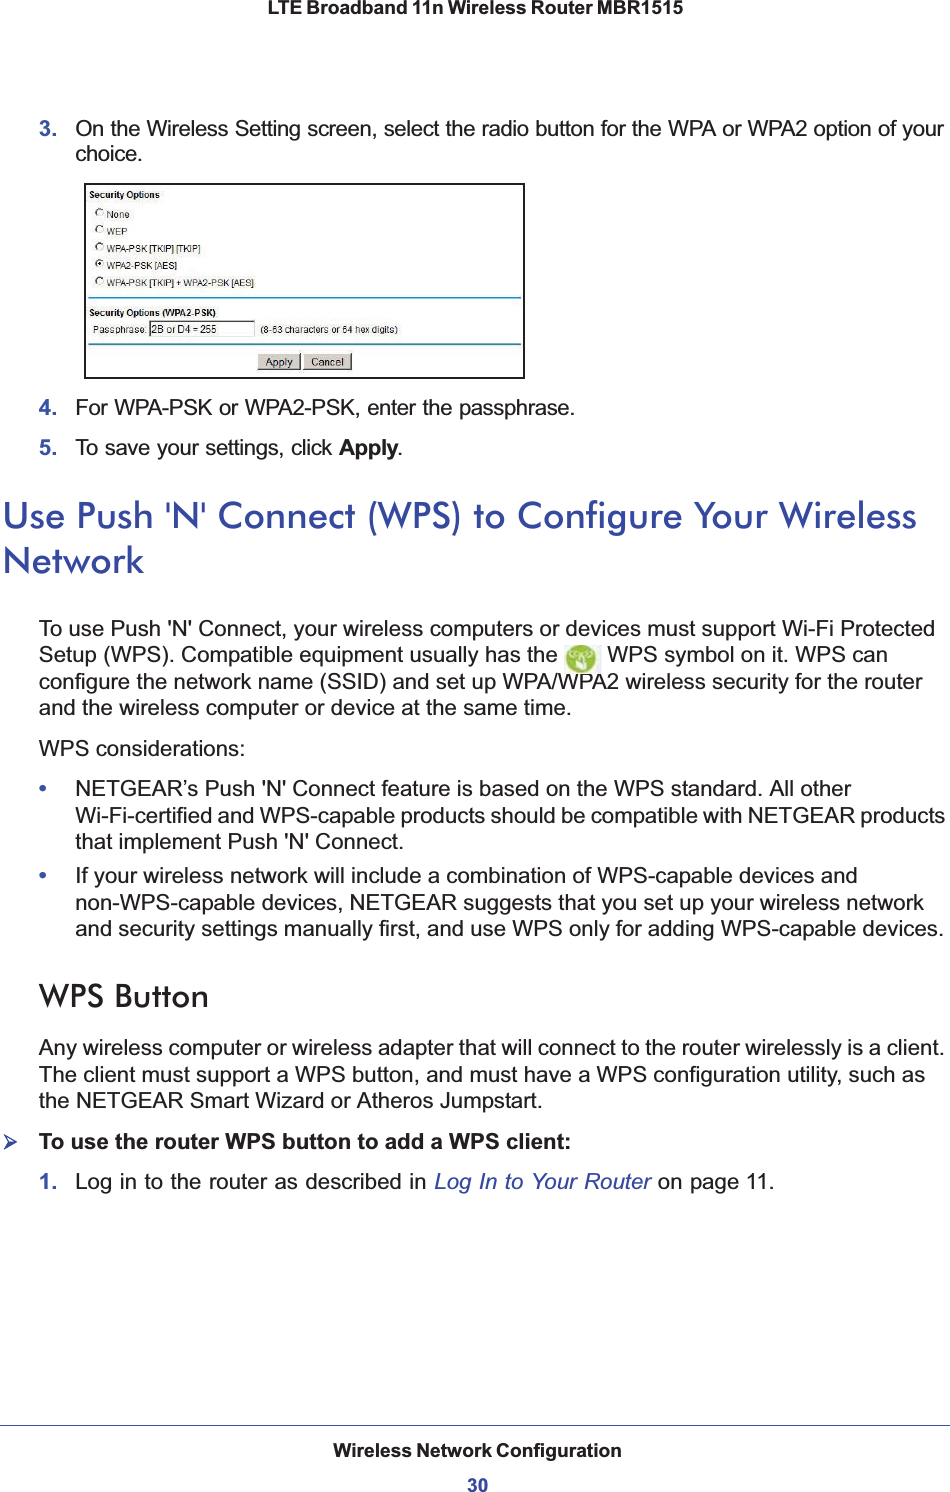 Wireless Network Configuration30LTE Broadband 11n Wireless Router MBR1515 3. On the Wireless Setting screen, select the radio button for the WPA or WPA2 option of your choice.4. For WPA-PSK or WPA2-PSK, enter the passphrase. 5. To save your settings, click Apply.Use Push &apos;N&apos; Connect (WPS) to Configure Your Wireless NetworkTo use Push &apos;N&apos; Connect, your wireless computers or devices must support Wi-Fi Protected Setup (WPS). Compatible equipment usually has the   WPS symbol on it. WPS can configure the network name (SSID) and set up WPA/WPA2 wireless security for the router and the wireless computer or device at the same time. WPS considerations:•NETGEAR’s Push &apos;N&apos; Connect feature is based on the WPS standard. All other Wi-Fi-certified and WPS-capable products should be compatible with NETGEAR products that implement Push &apos;N&apos; Connect.•If your wireless network will include a combination of WPS-capable devices and non-WPS-capable devices, NETGEAR suggests that you set up your wireless network and security settings manually first, and use WPS only for adding WPS-capable devices. WPS Button Any wireless computer or wireless adapter that will connect to the router wirelessly is a client. The client must support a WPS button, and must have a WPS configuration utility, such as the NETGEAR Smart Wizard or Atheros Jumpstart.¾To use the router WPS button to add a WPS client: 1. Log in to the router as described in Log In to Your Router on page 11.